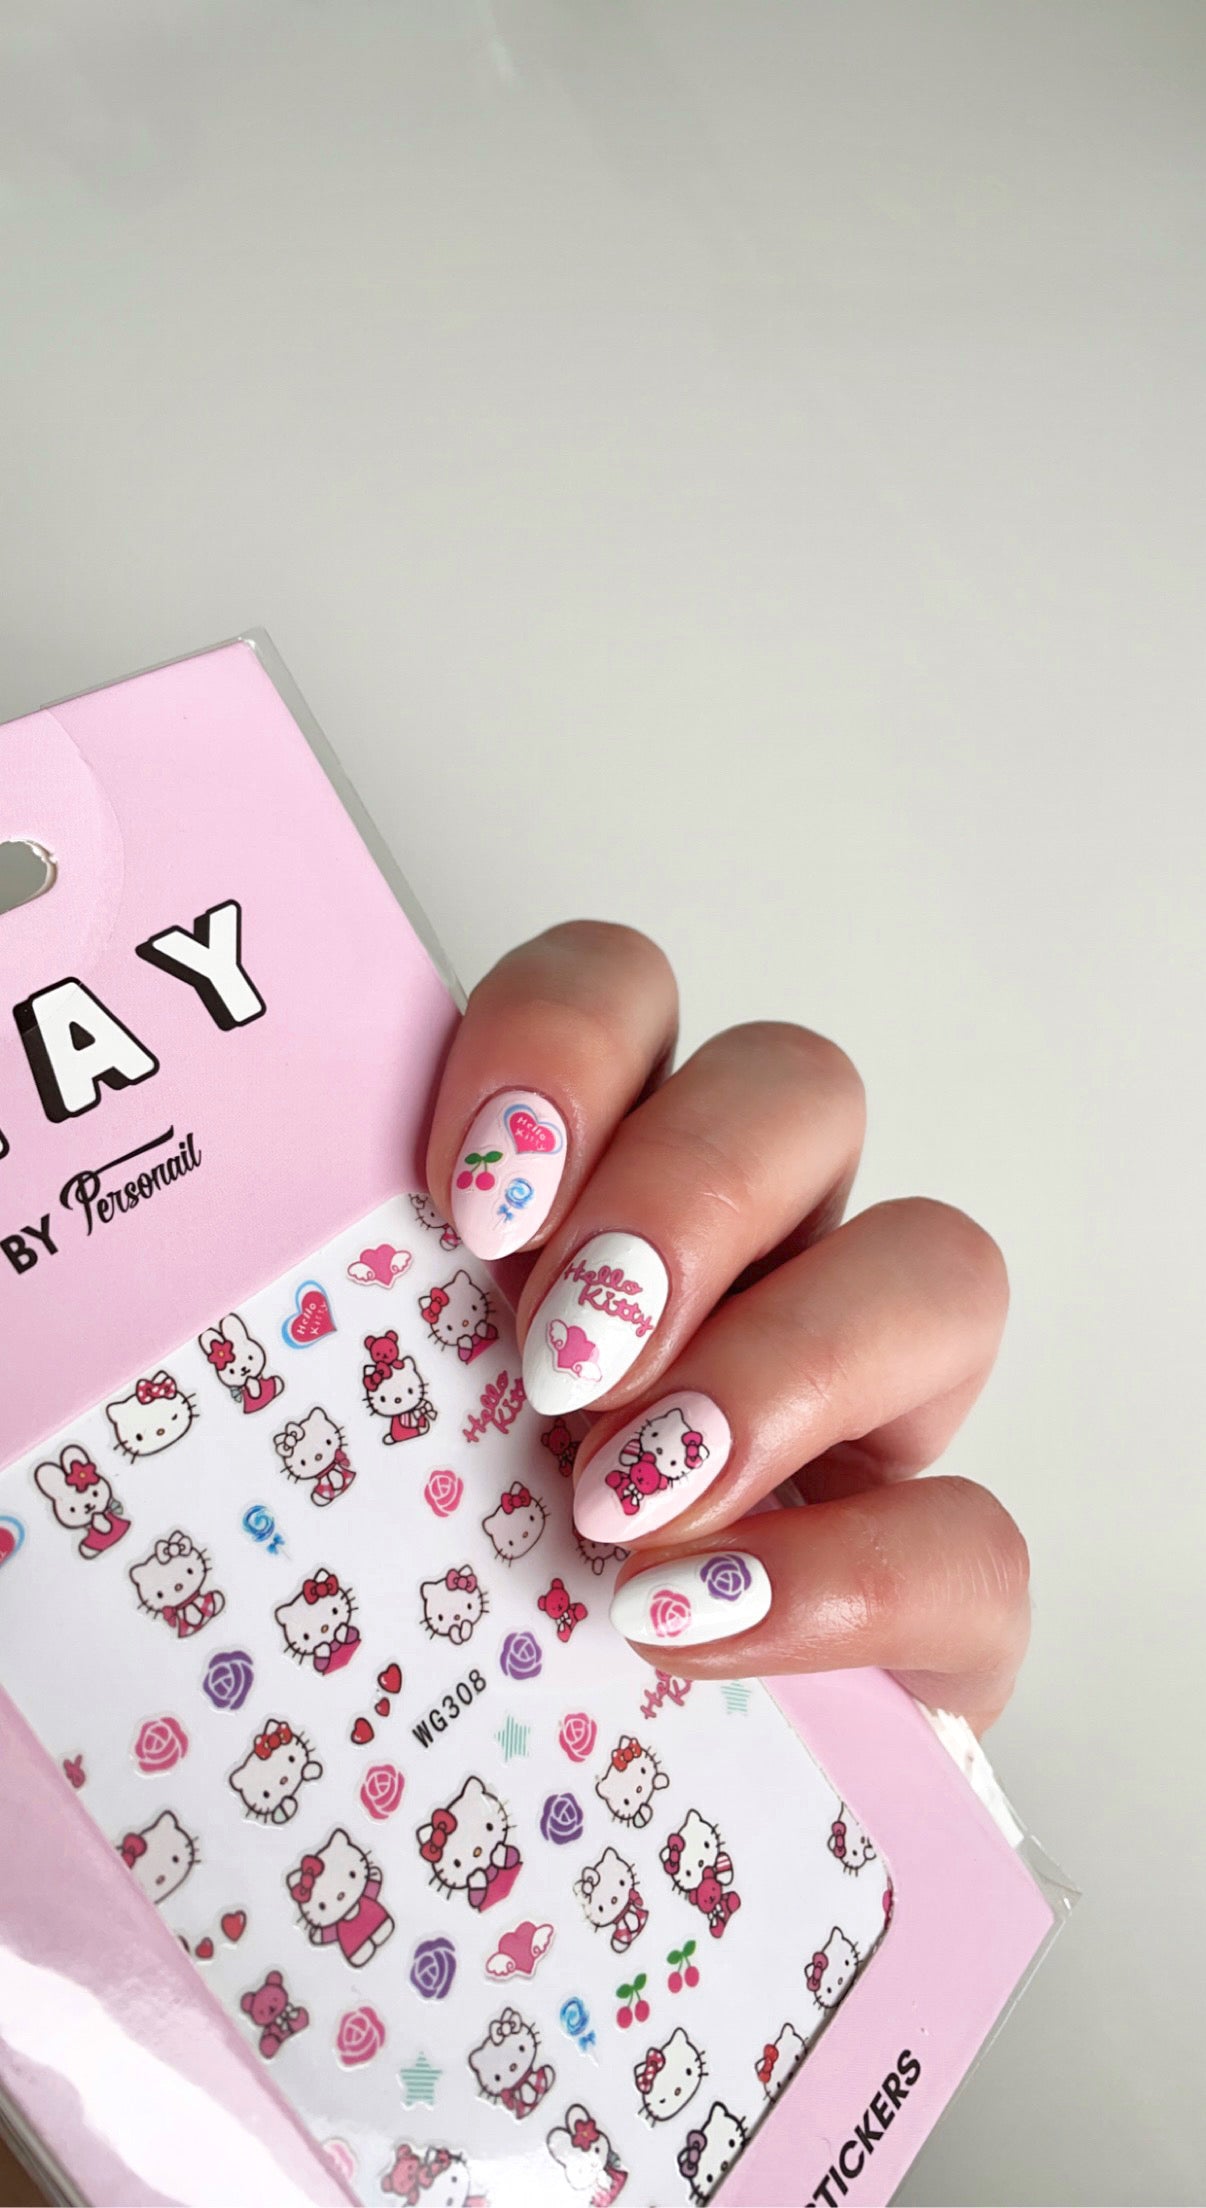  Hello Kitty Nail Art Sticker(P) - 5 Pack Mixed Design : Beauty  & Personal Care